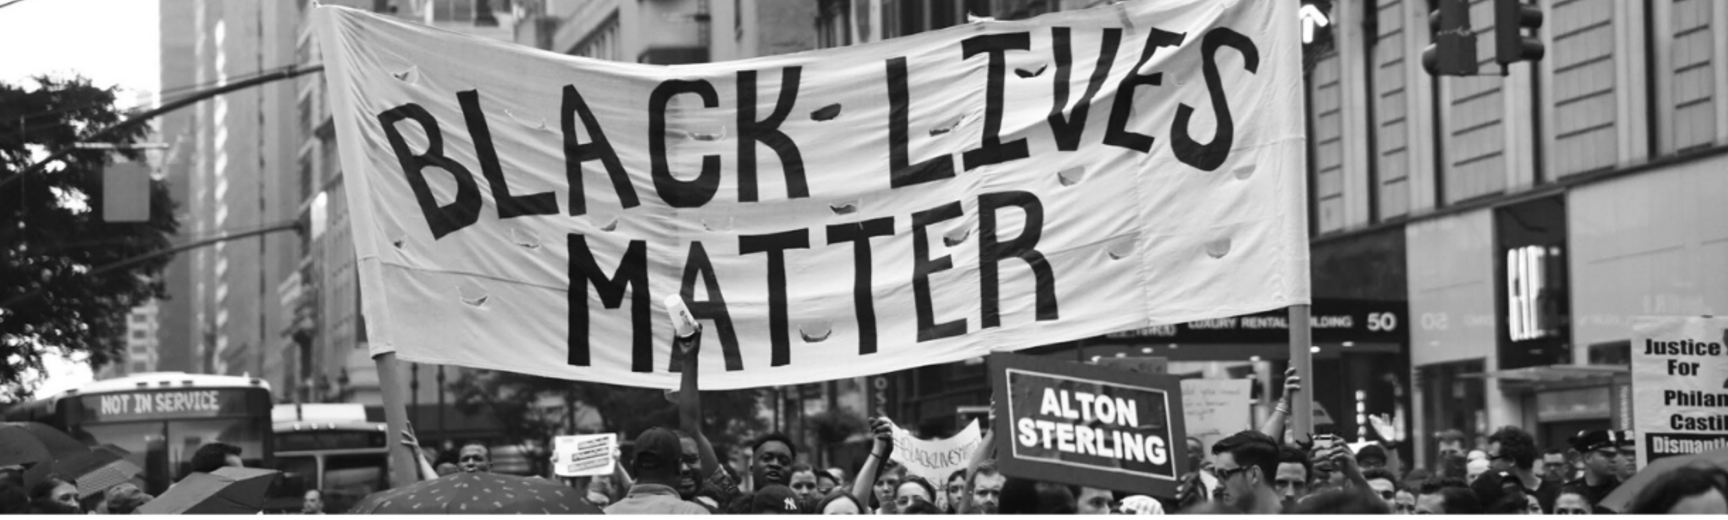 Black and white image of a group of people in a city, peacefully marching holding a sign 'Black Lives Matter'